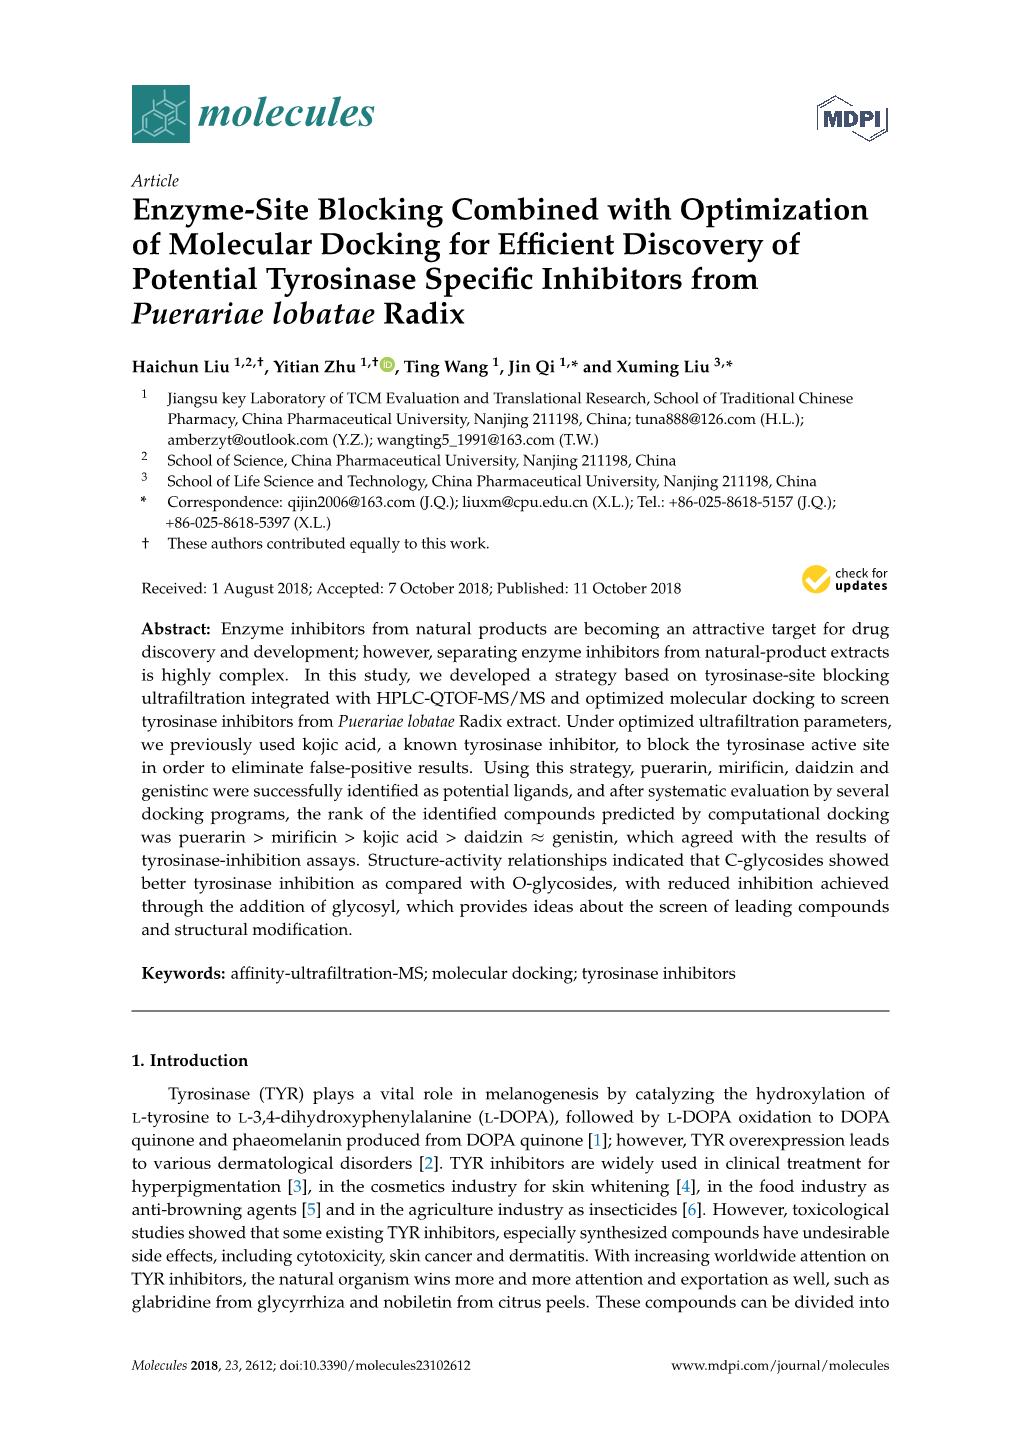 Enzyme-Site Blocking Combined with Optimization of Molecular Docking for Efficient Discovery of Potential Tyrosinase Specific In